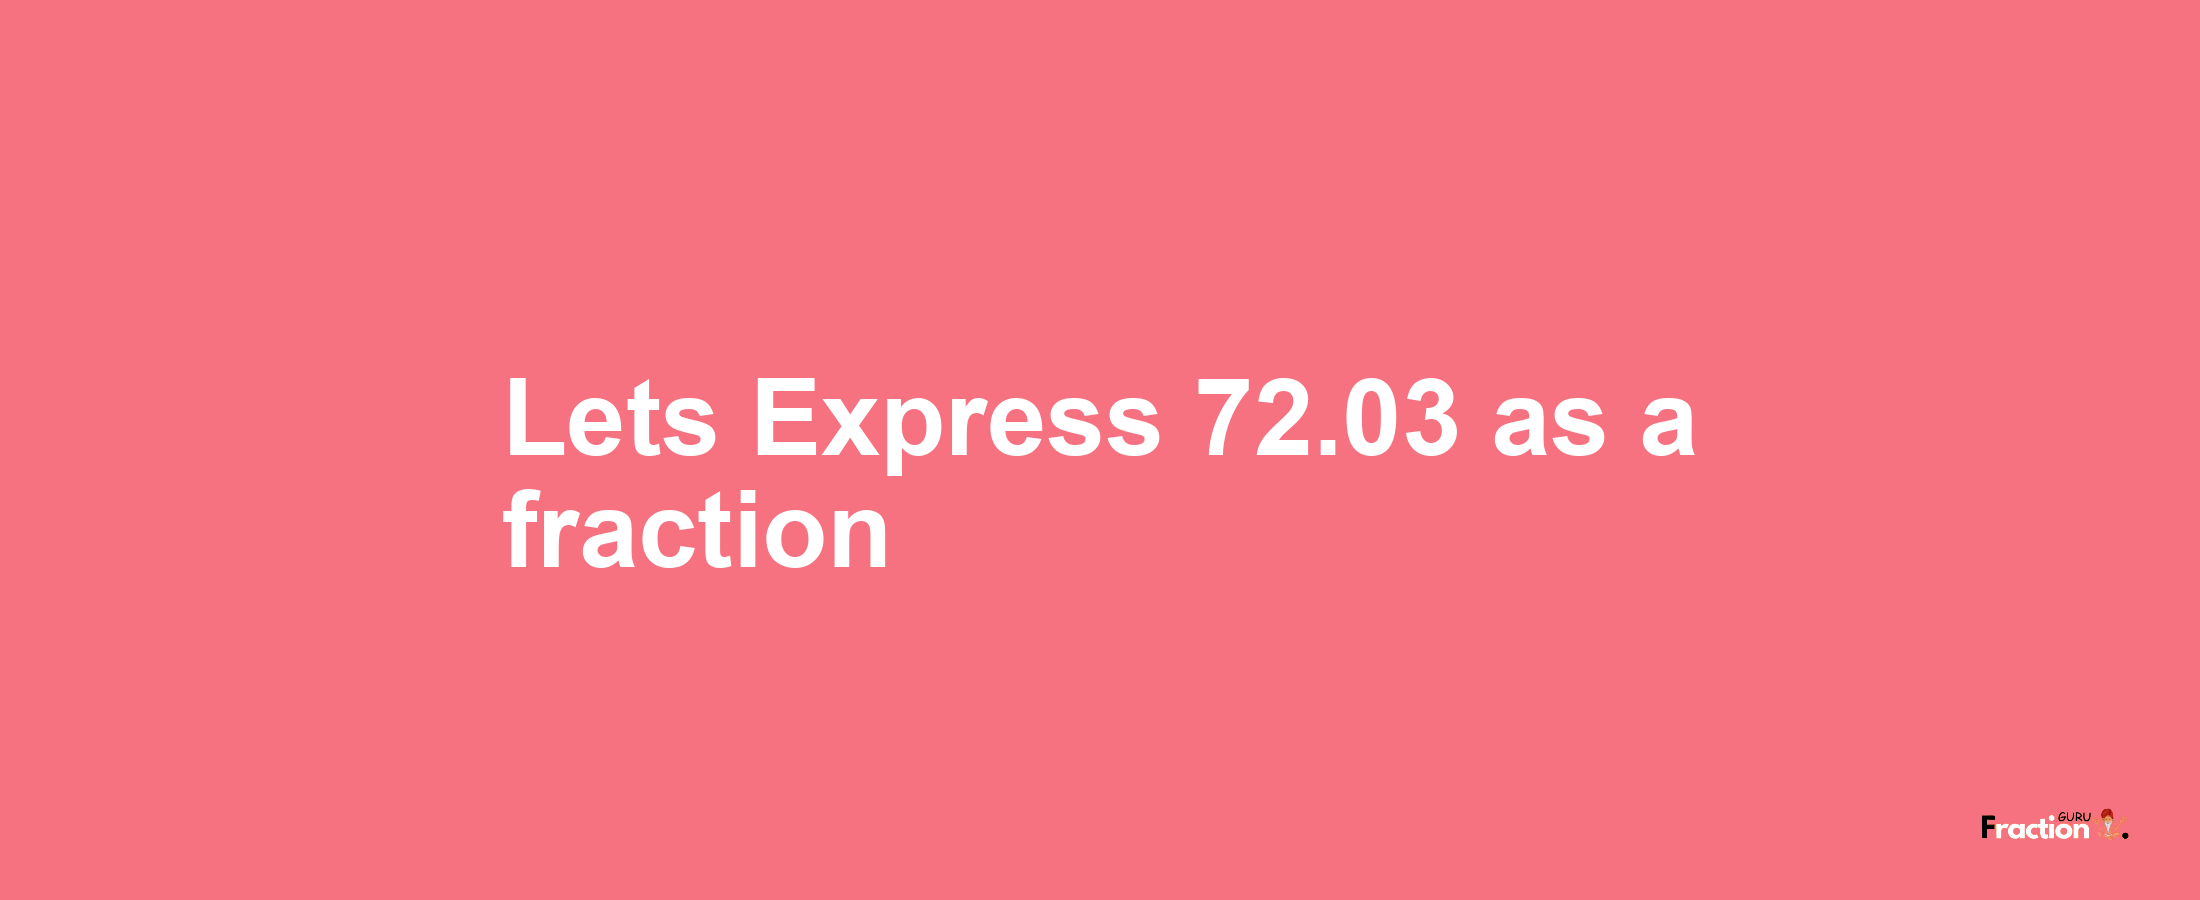 Lets Express 72.03 as afraction